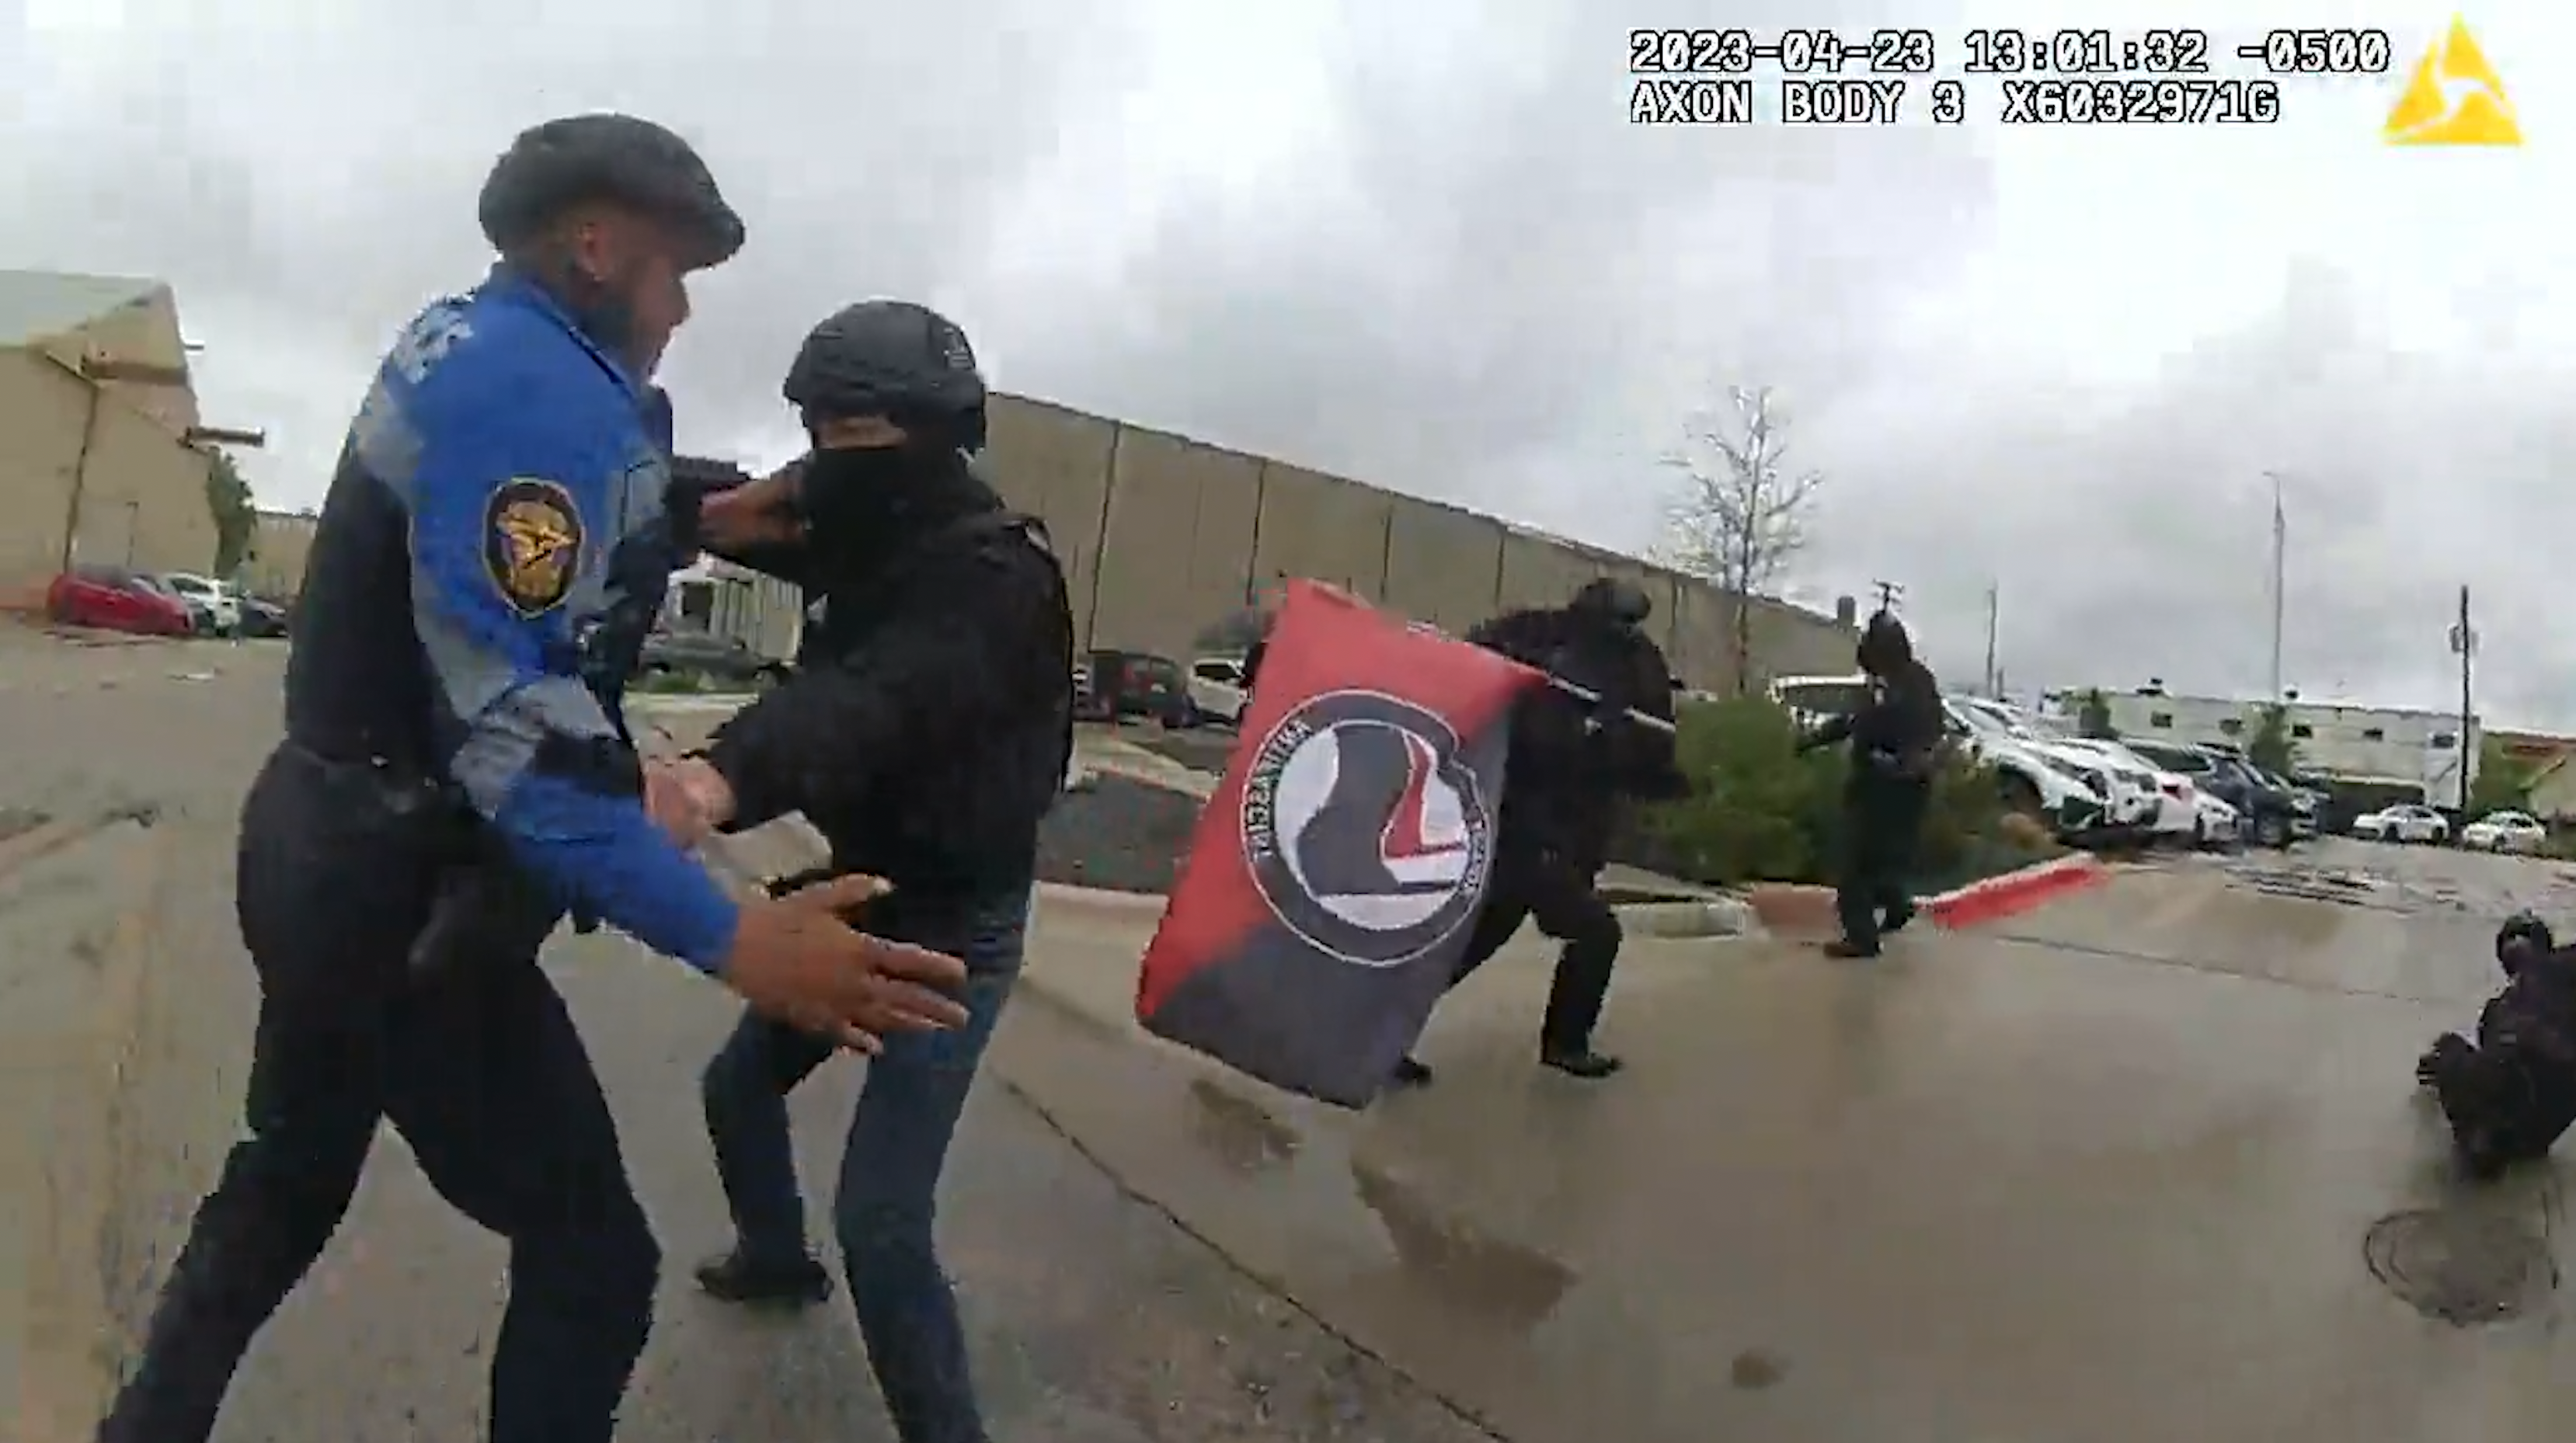 Texas Law Enforcement Officials Shut Down Antifa Counter-Protest Of ‘Protect Texas Kids’ Demonstration